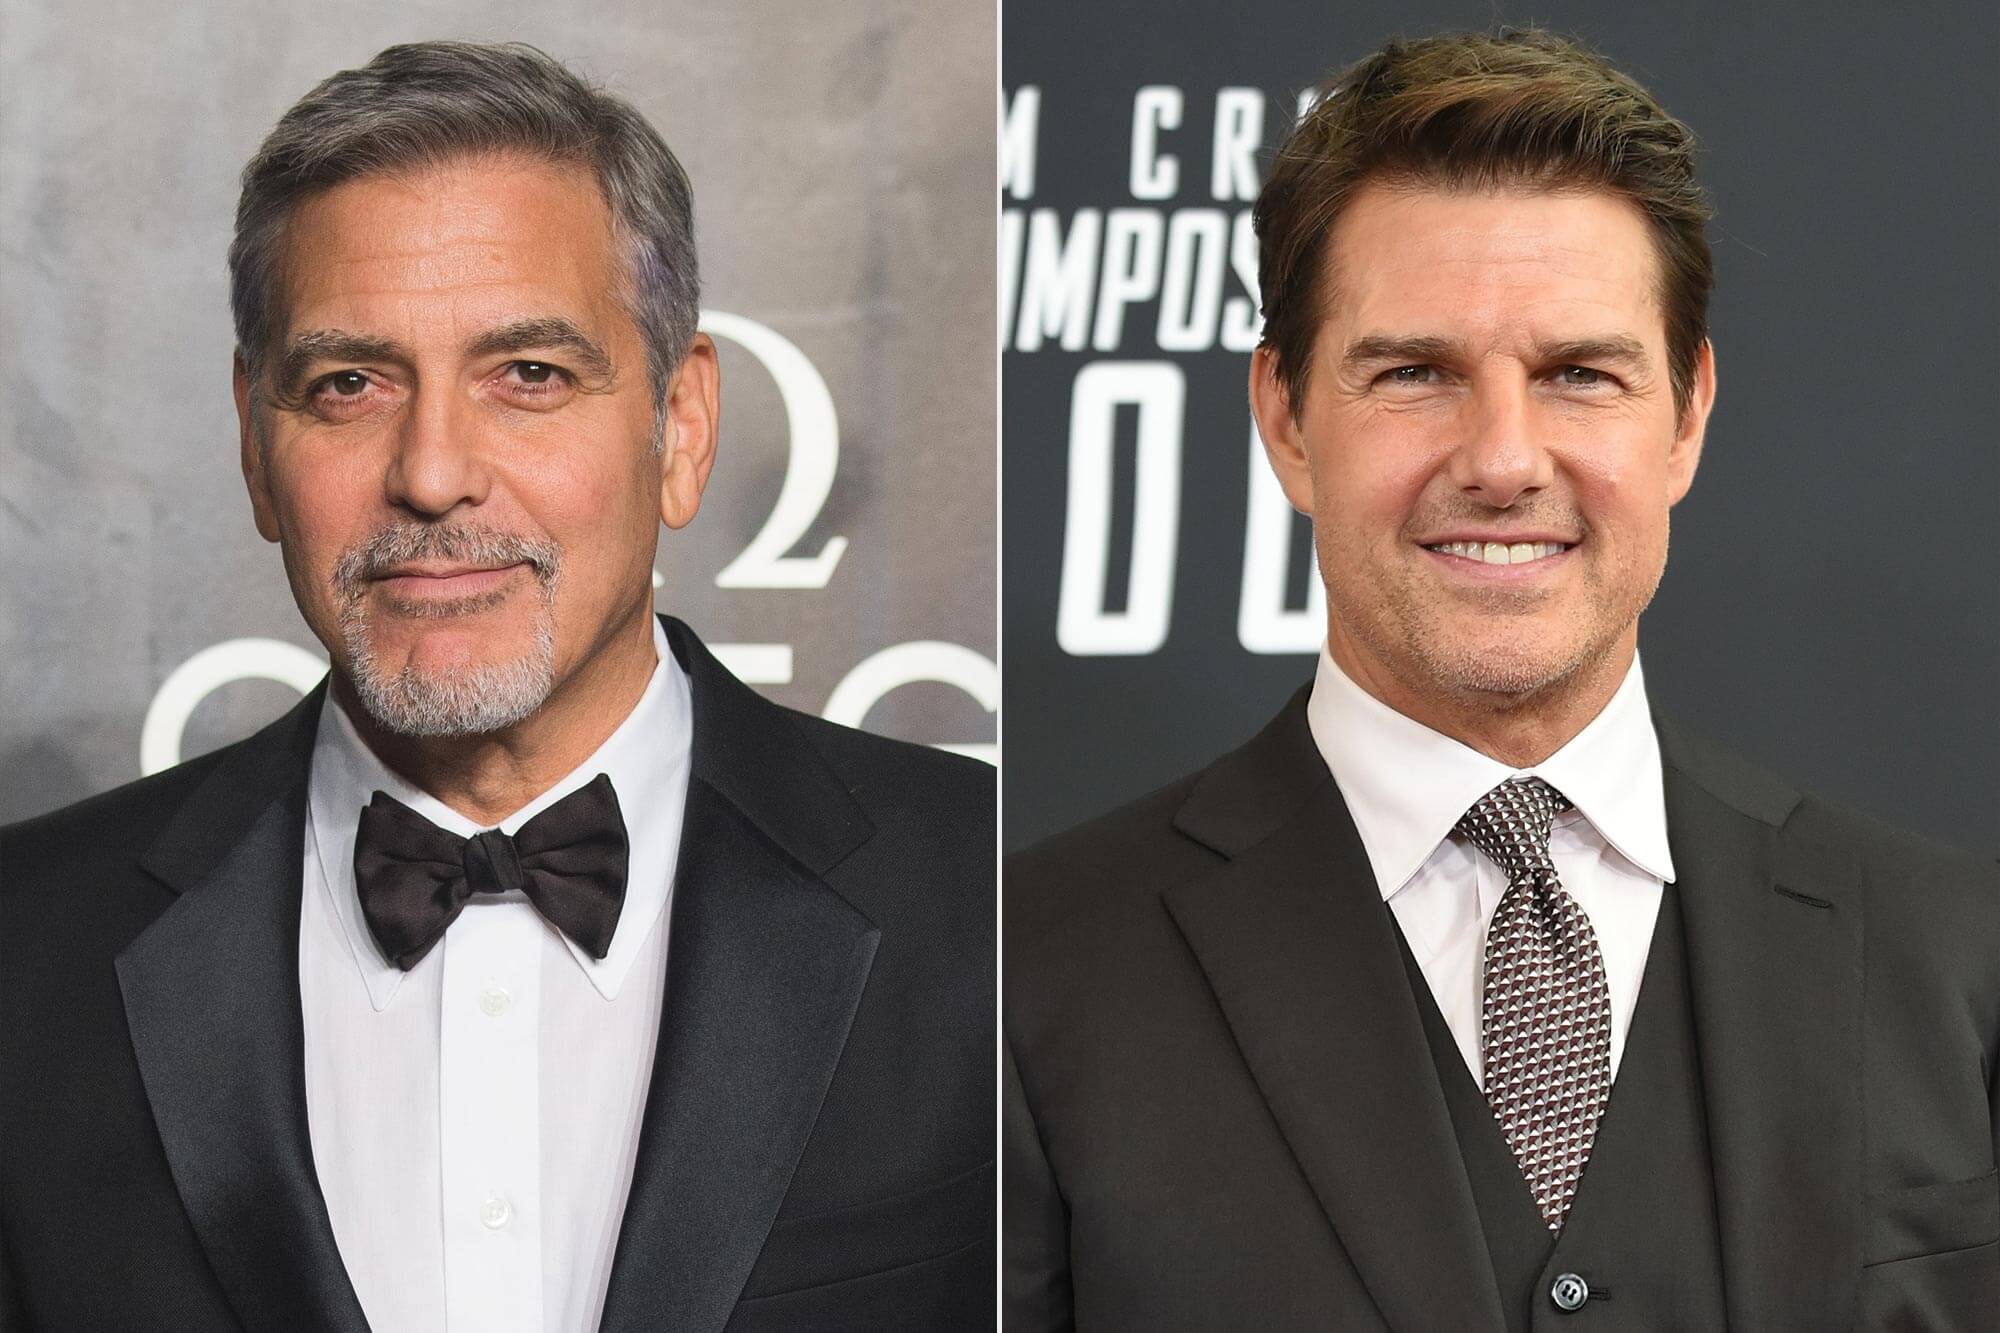 Tom Cruise and George Clooney